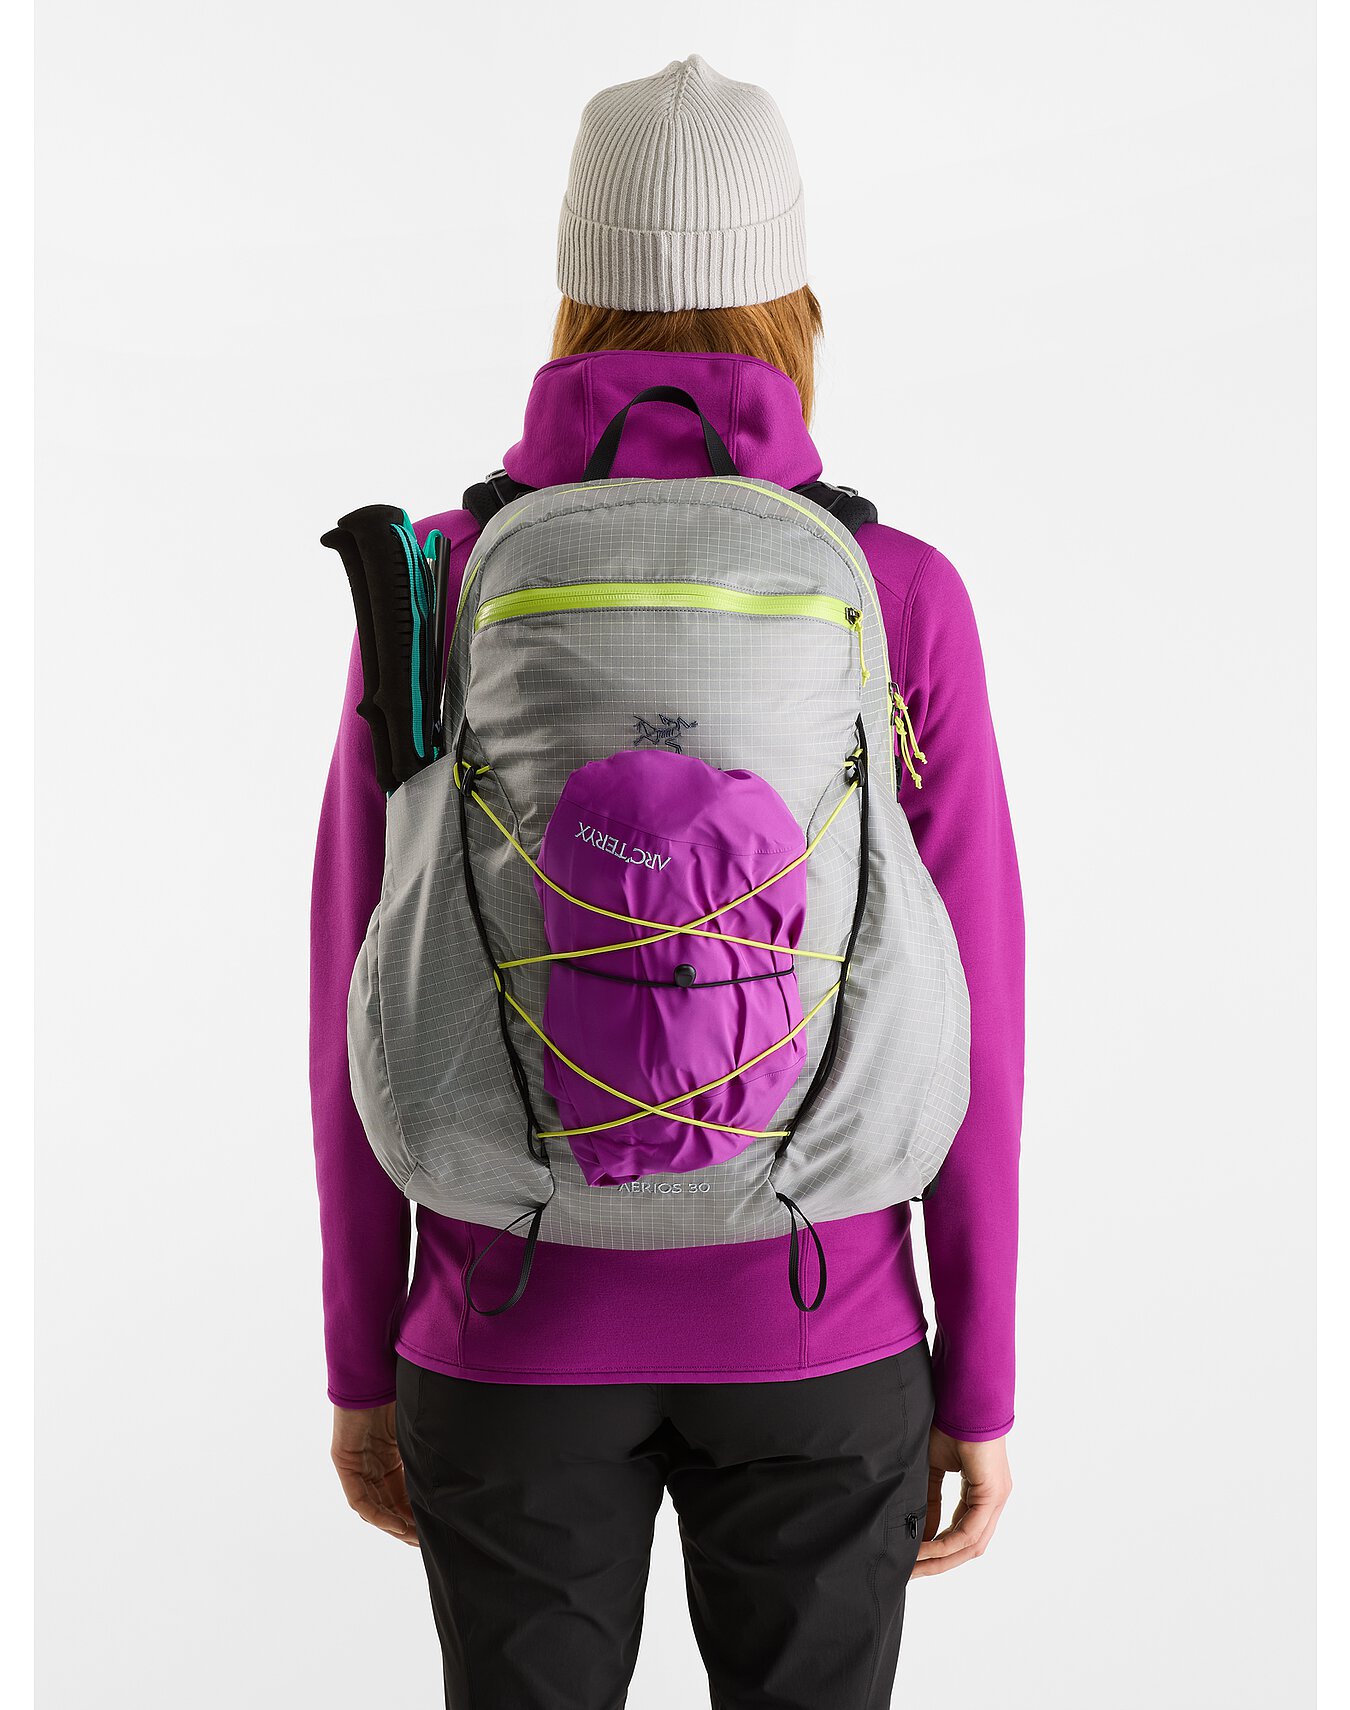 Aerios 30 Backpack Women's | Arc'teryx Outlet